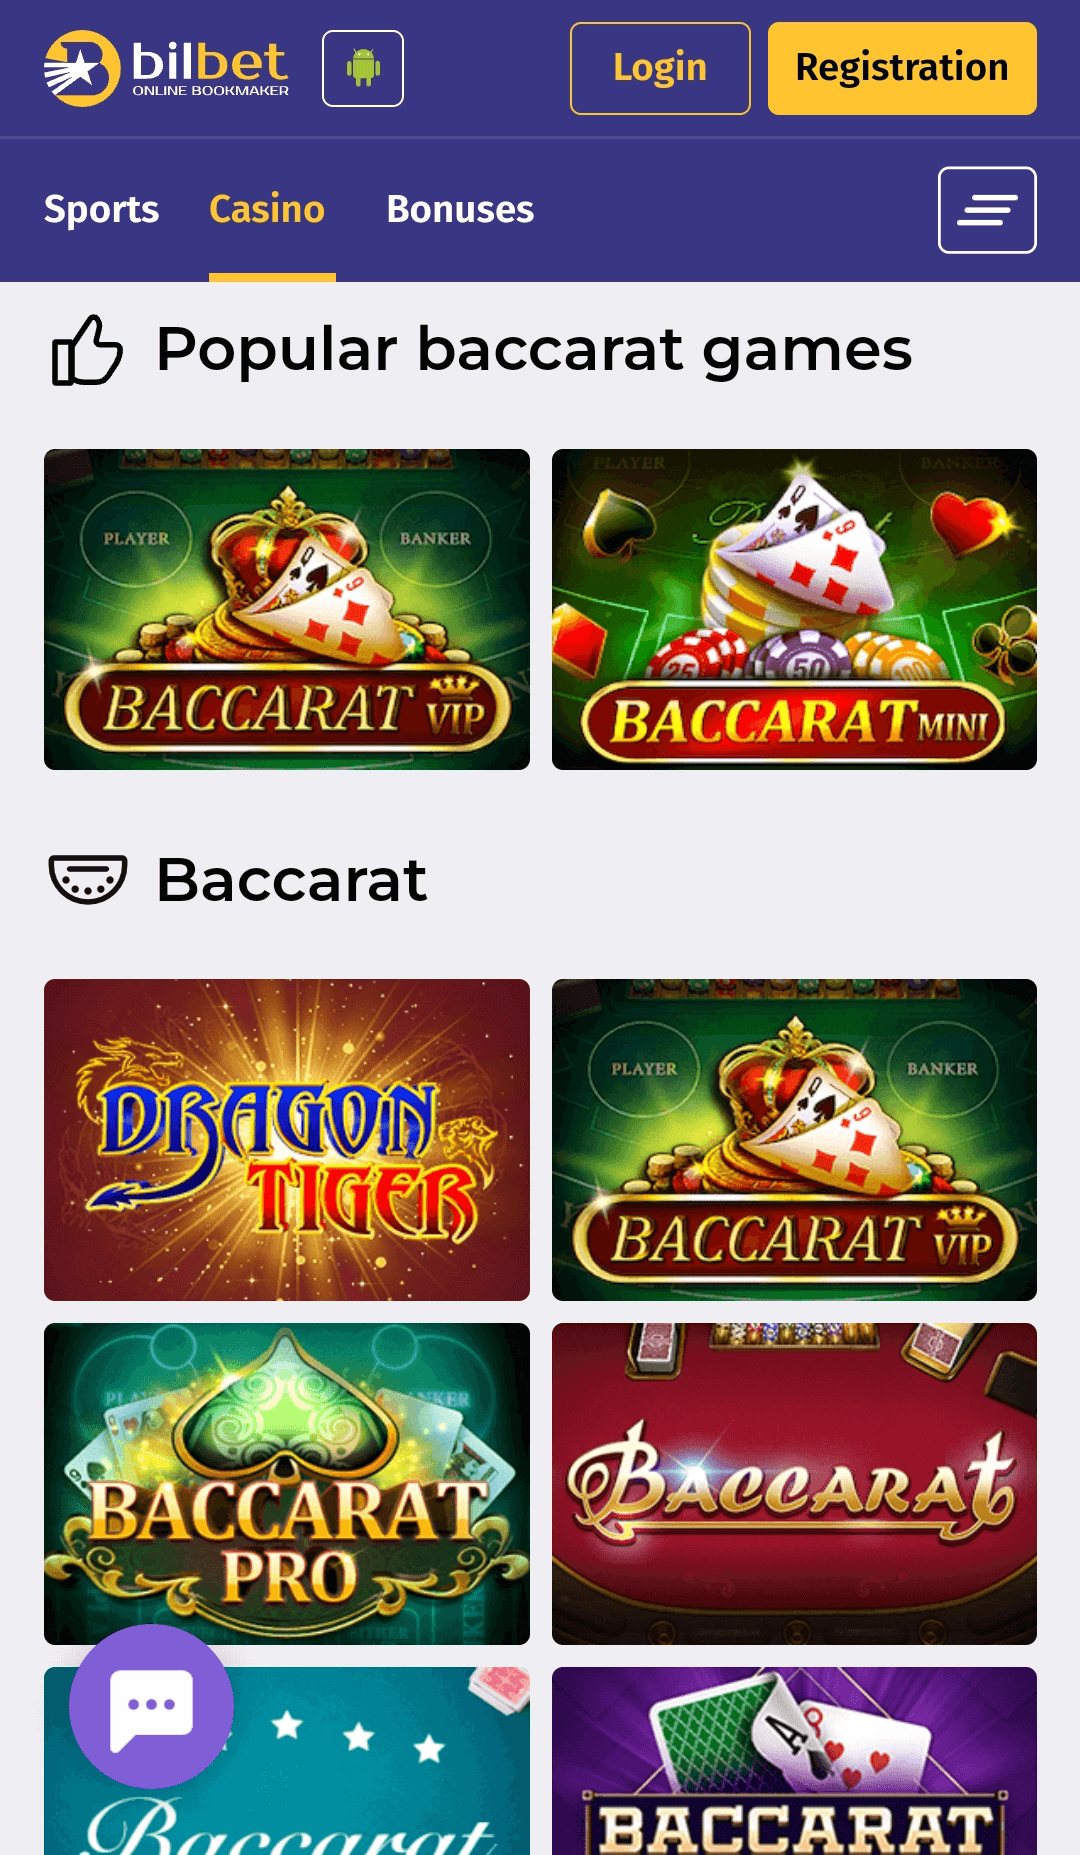 Baccarat section in the Bilbet mobile app